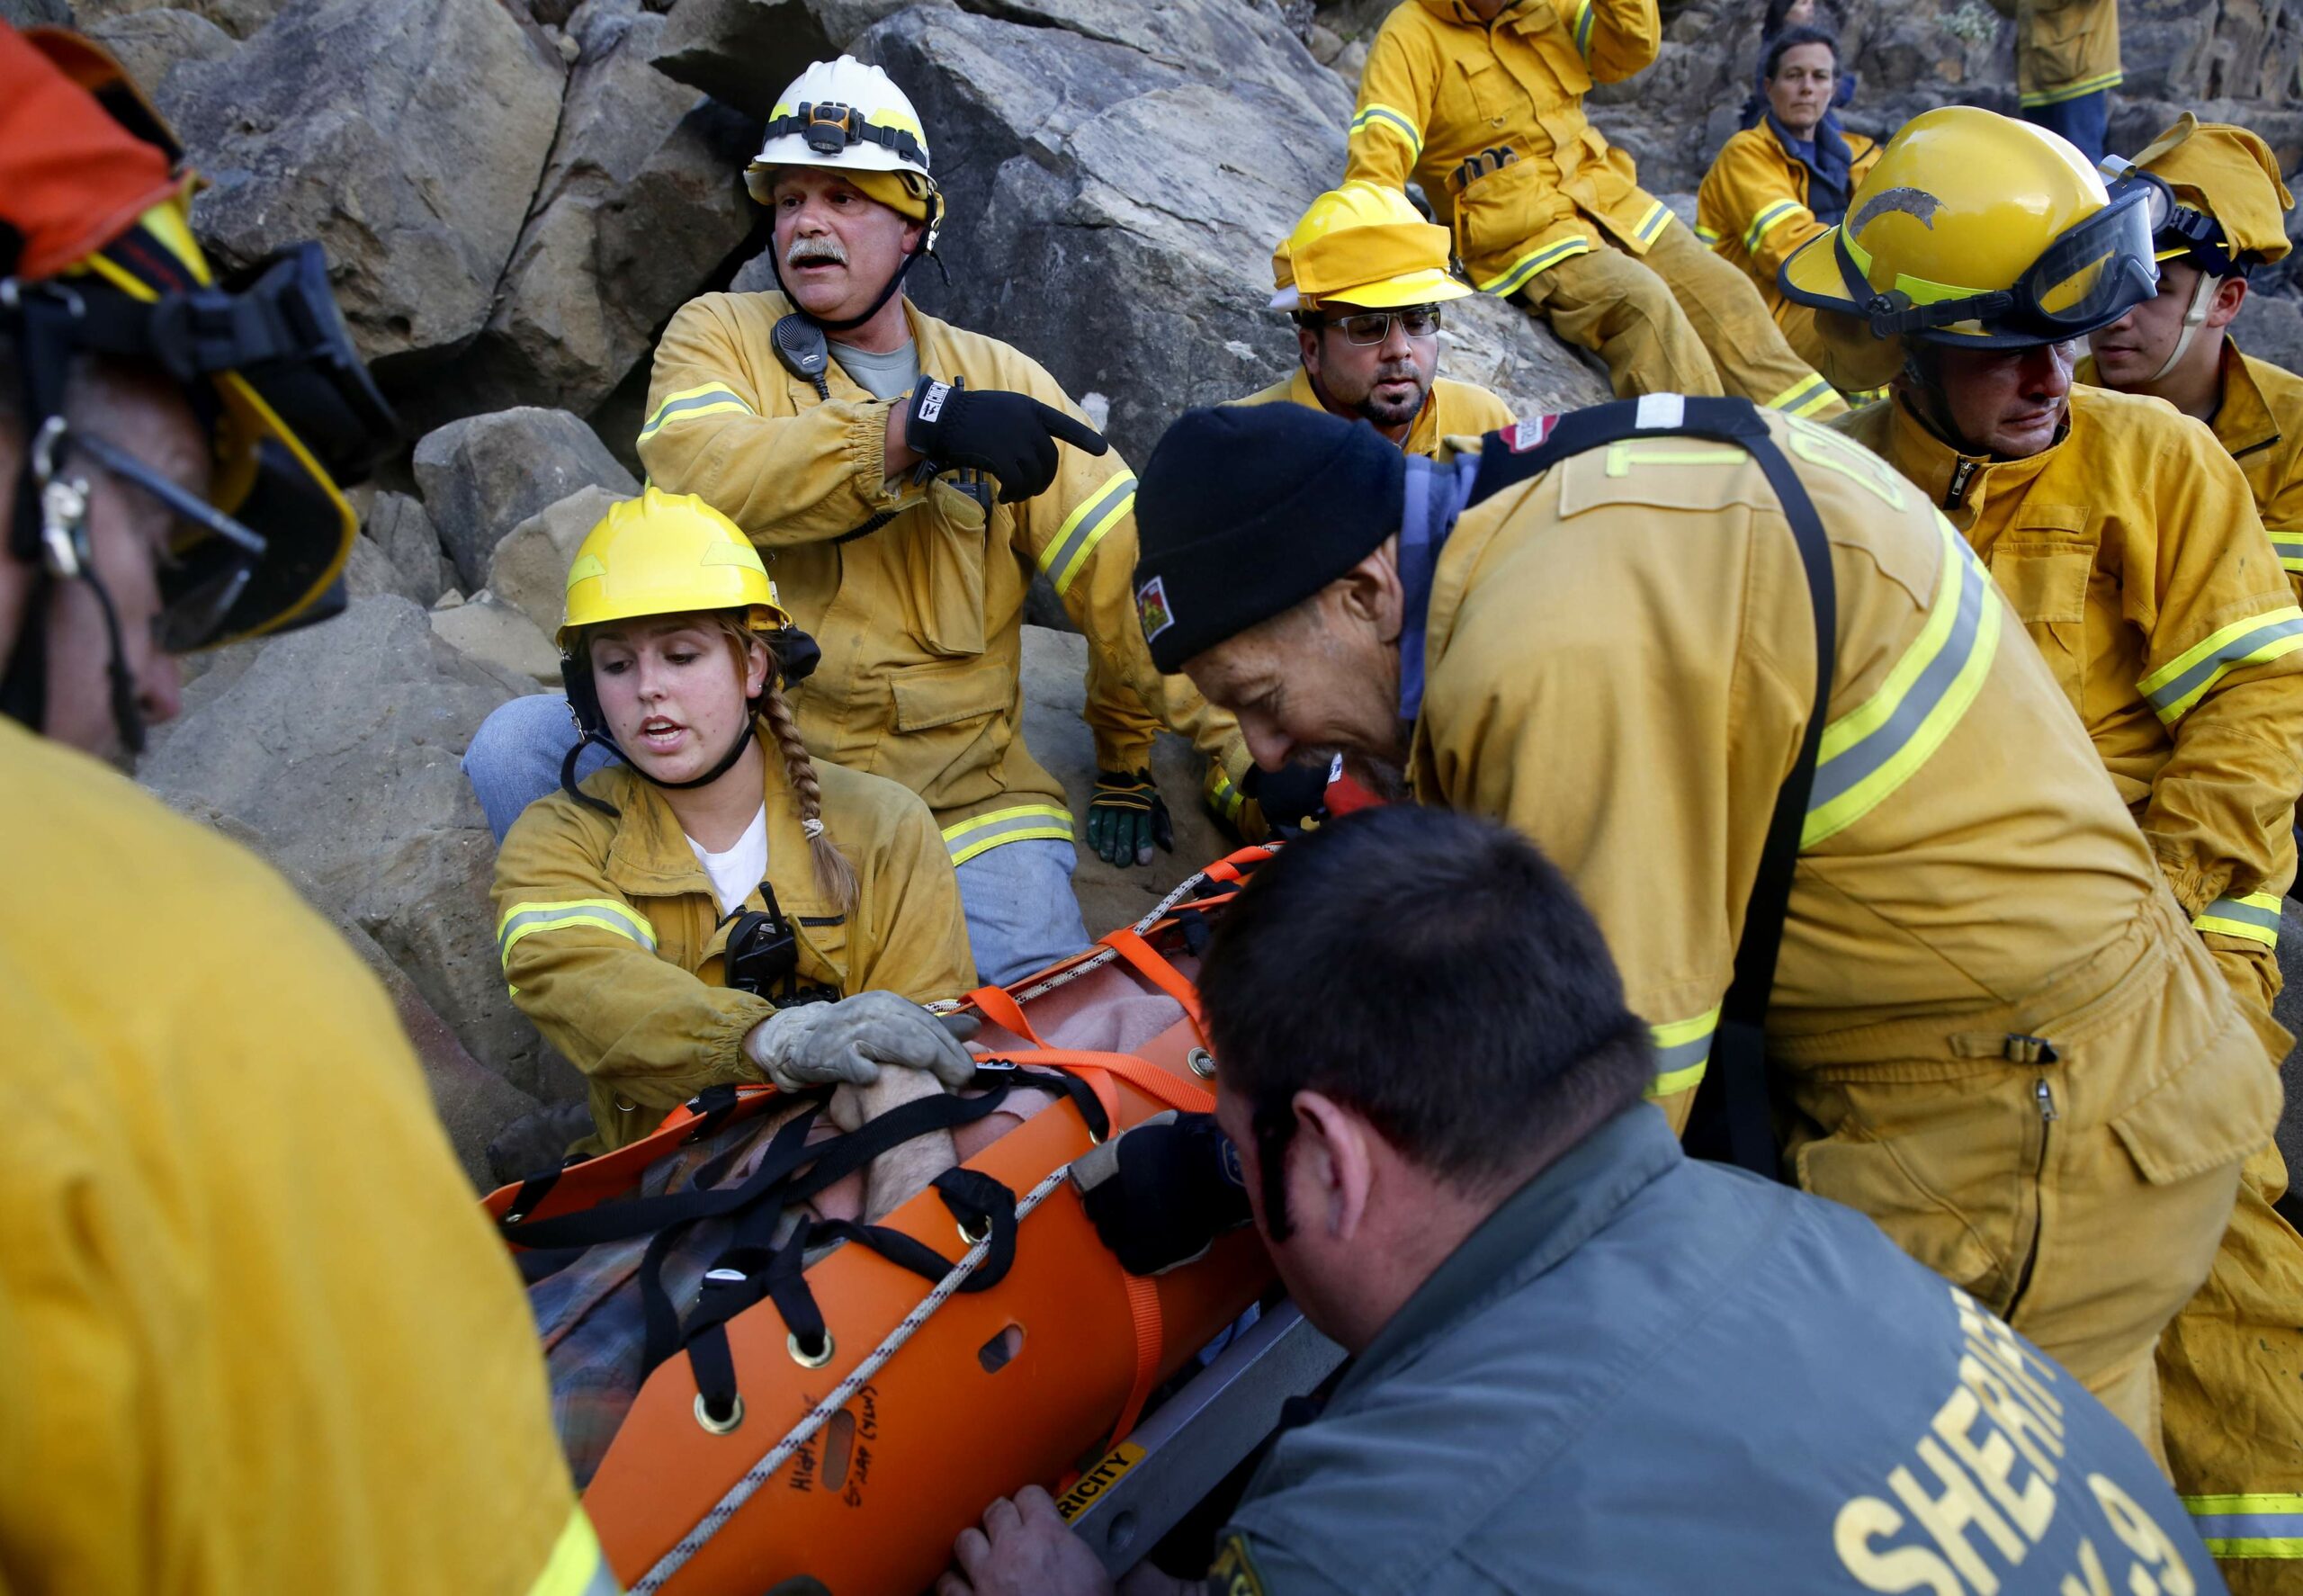 Erich Lynn, center, of the Timber Cove Fire Station leads rescue training. (Beth Schlanker / The Press Democrat)